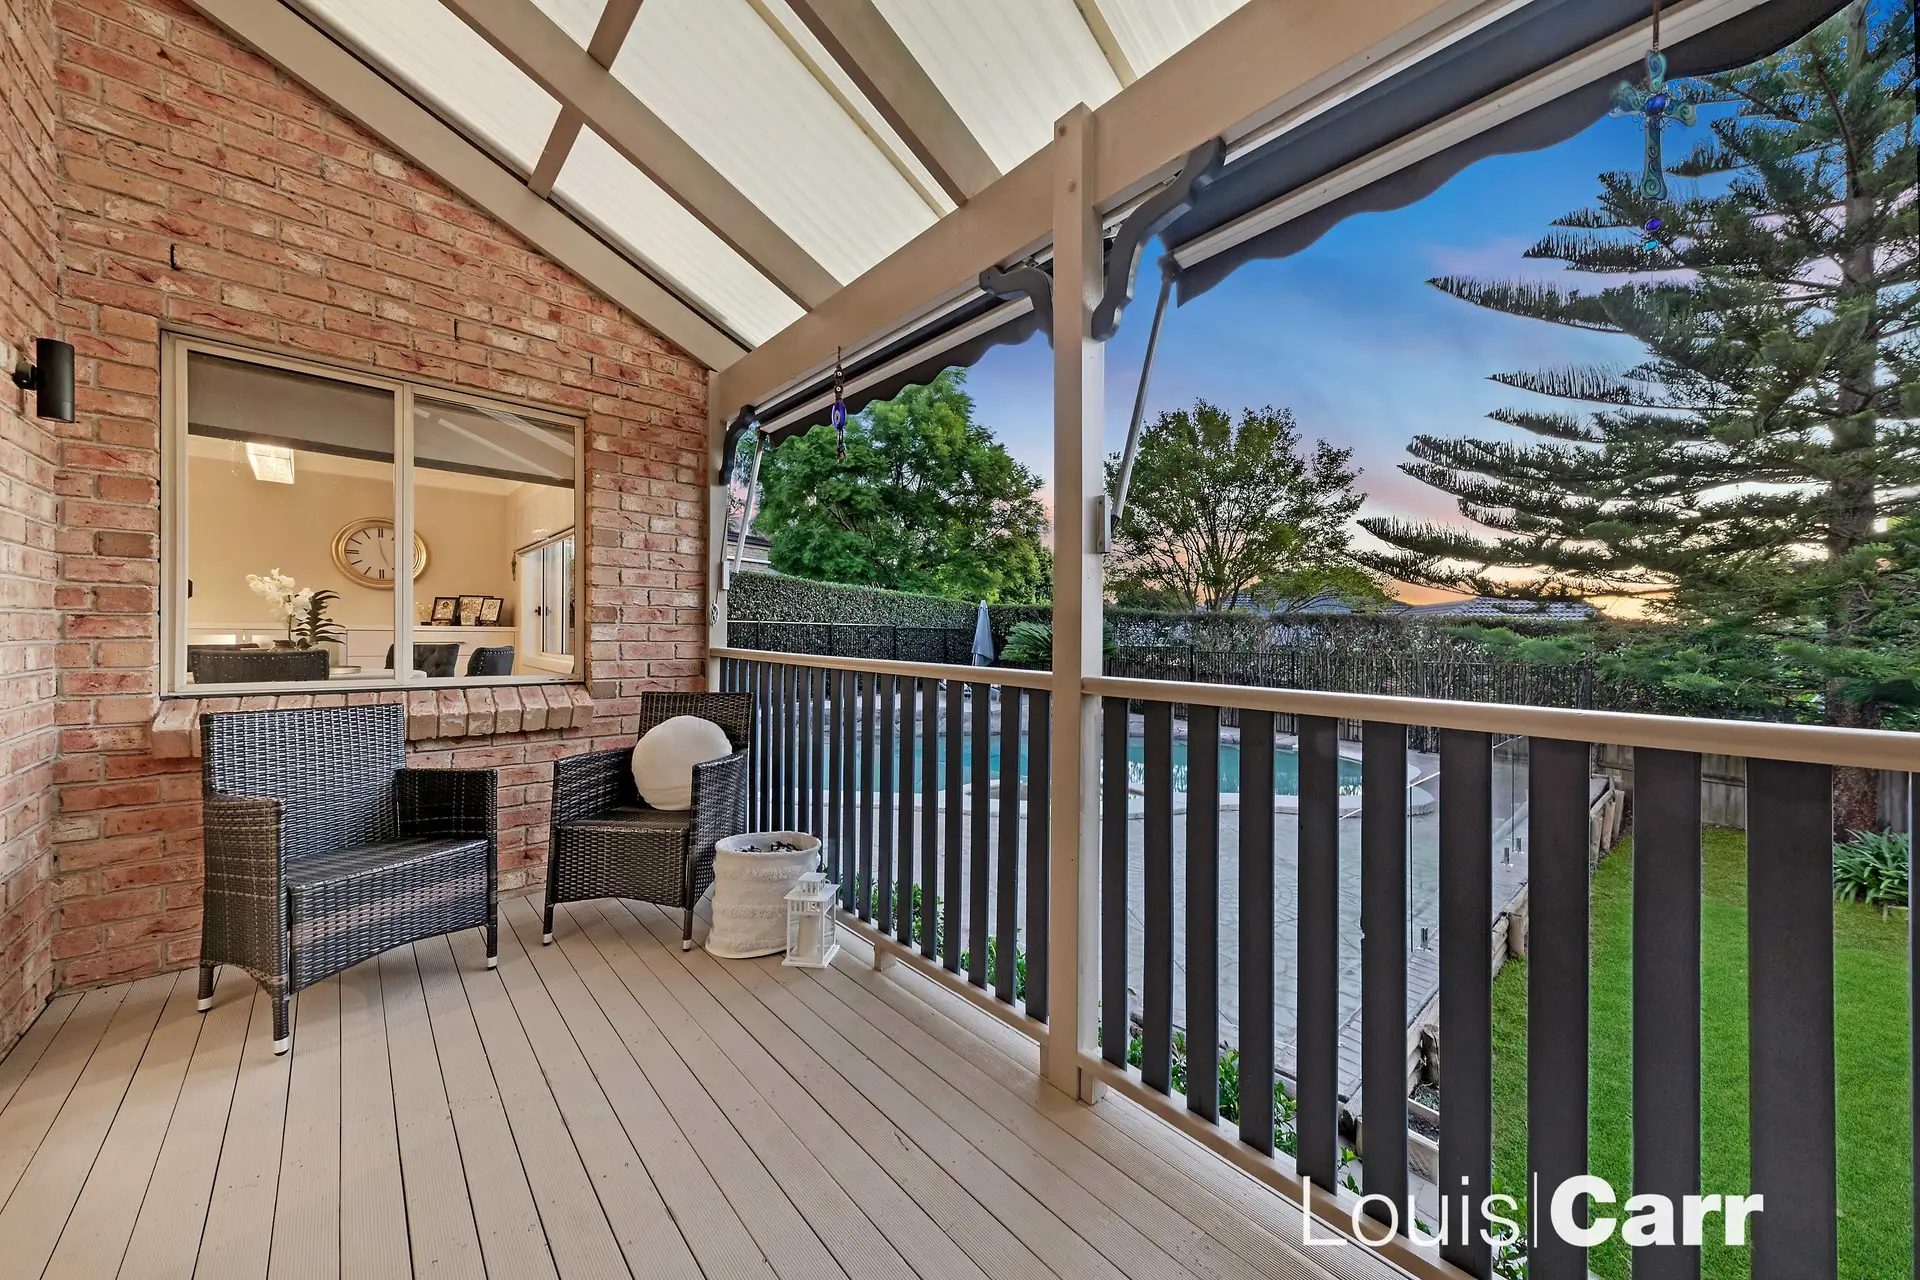 Photo #16: 10 Crinan Court, Castle Hill - Sold by Louis Carr Real Estate